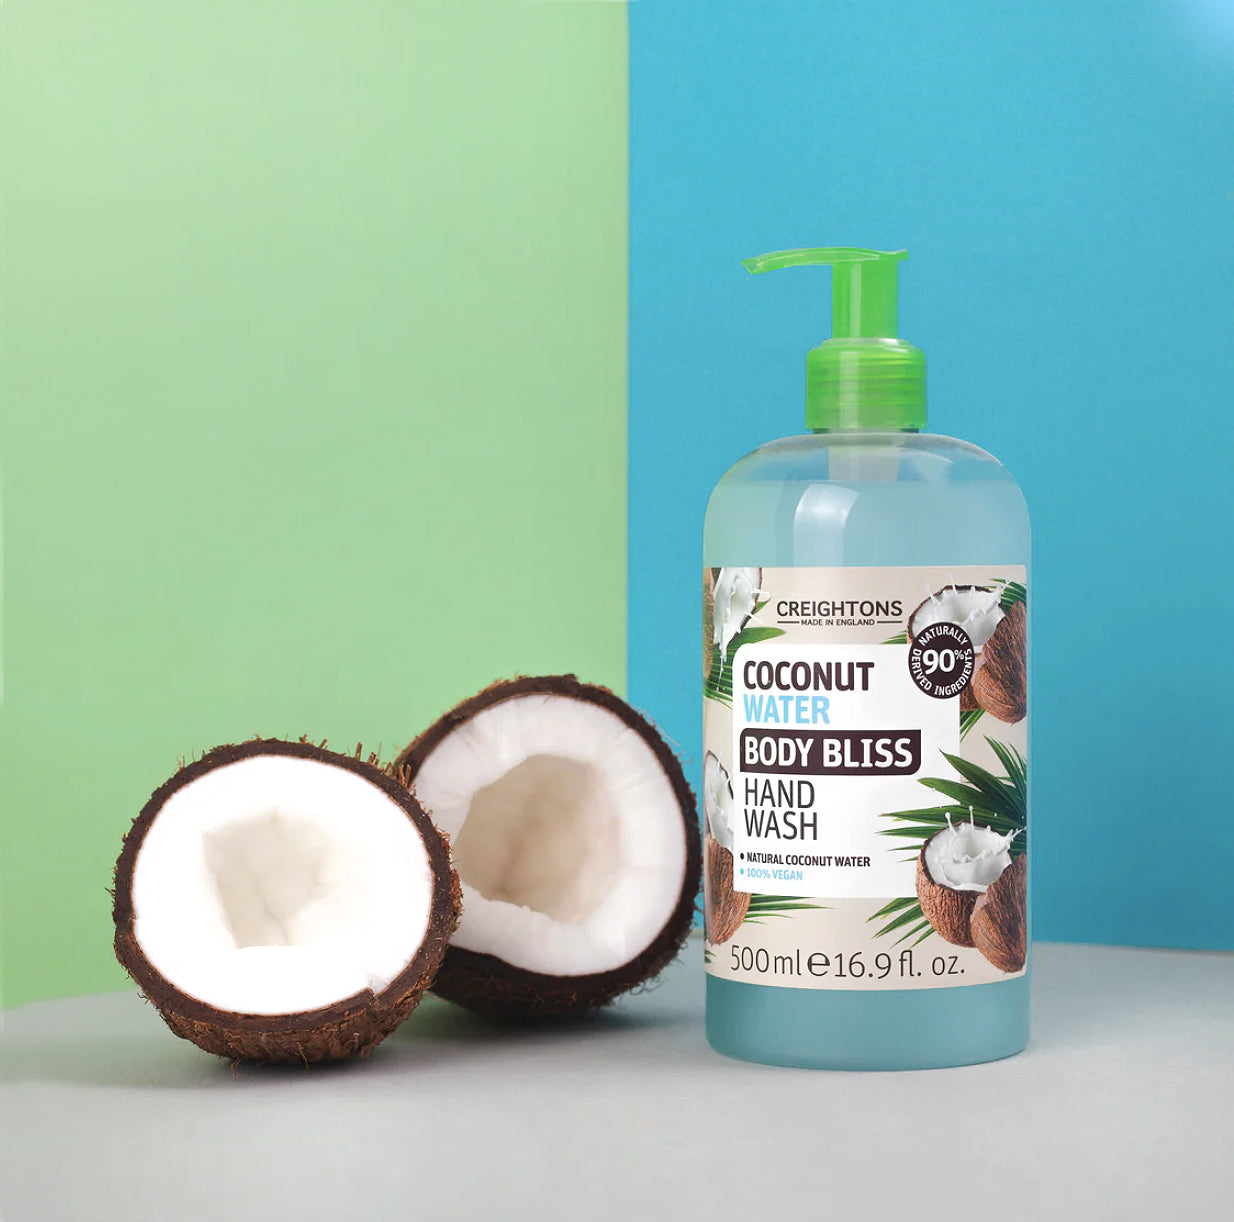 Creightons Coconut Water Body Bliss Hand Wash - 500ml